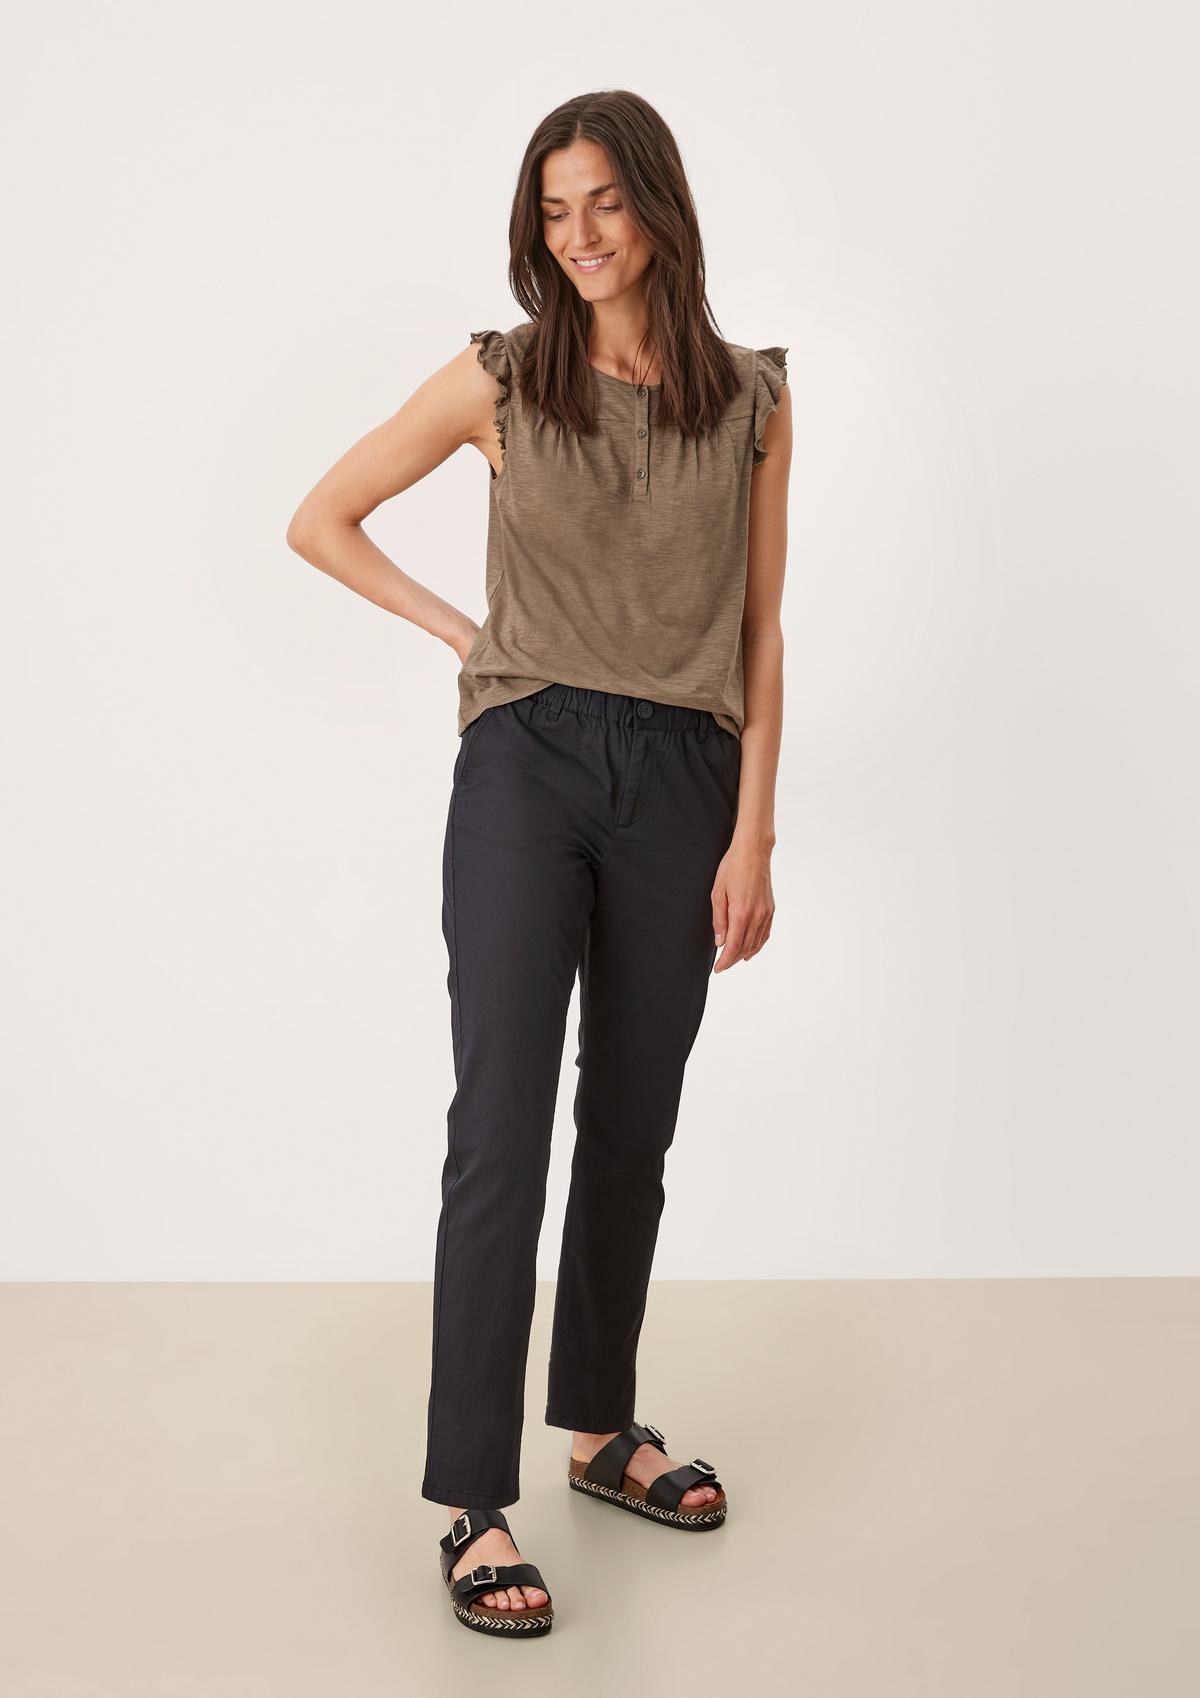 s.Oliver Regular fit: chinos with an elasticated waistband